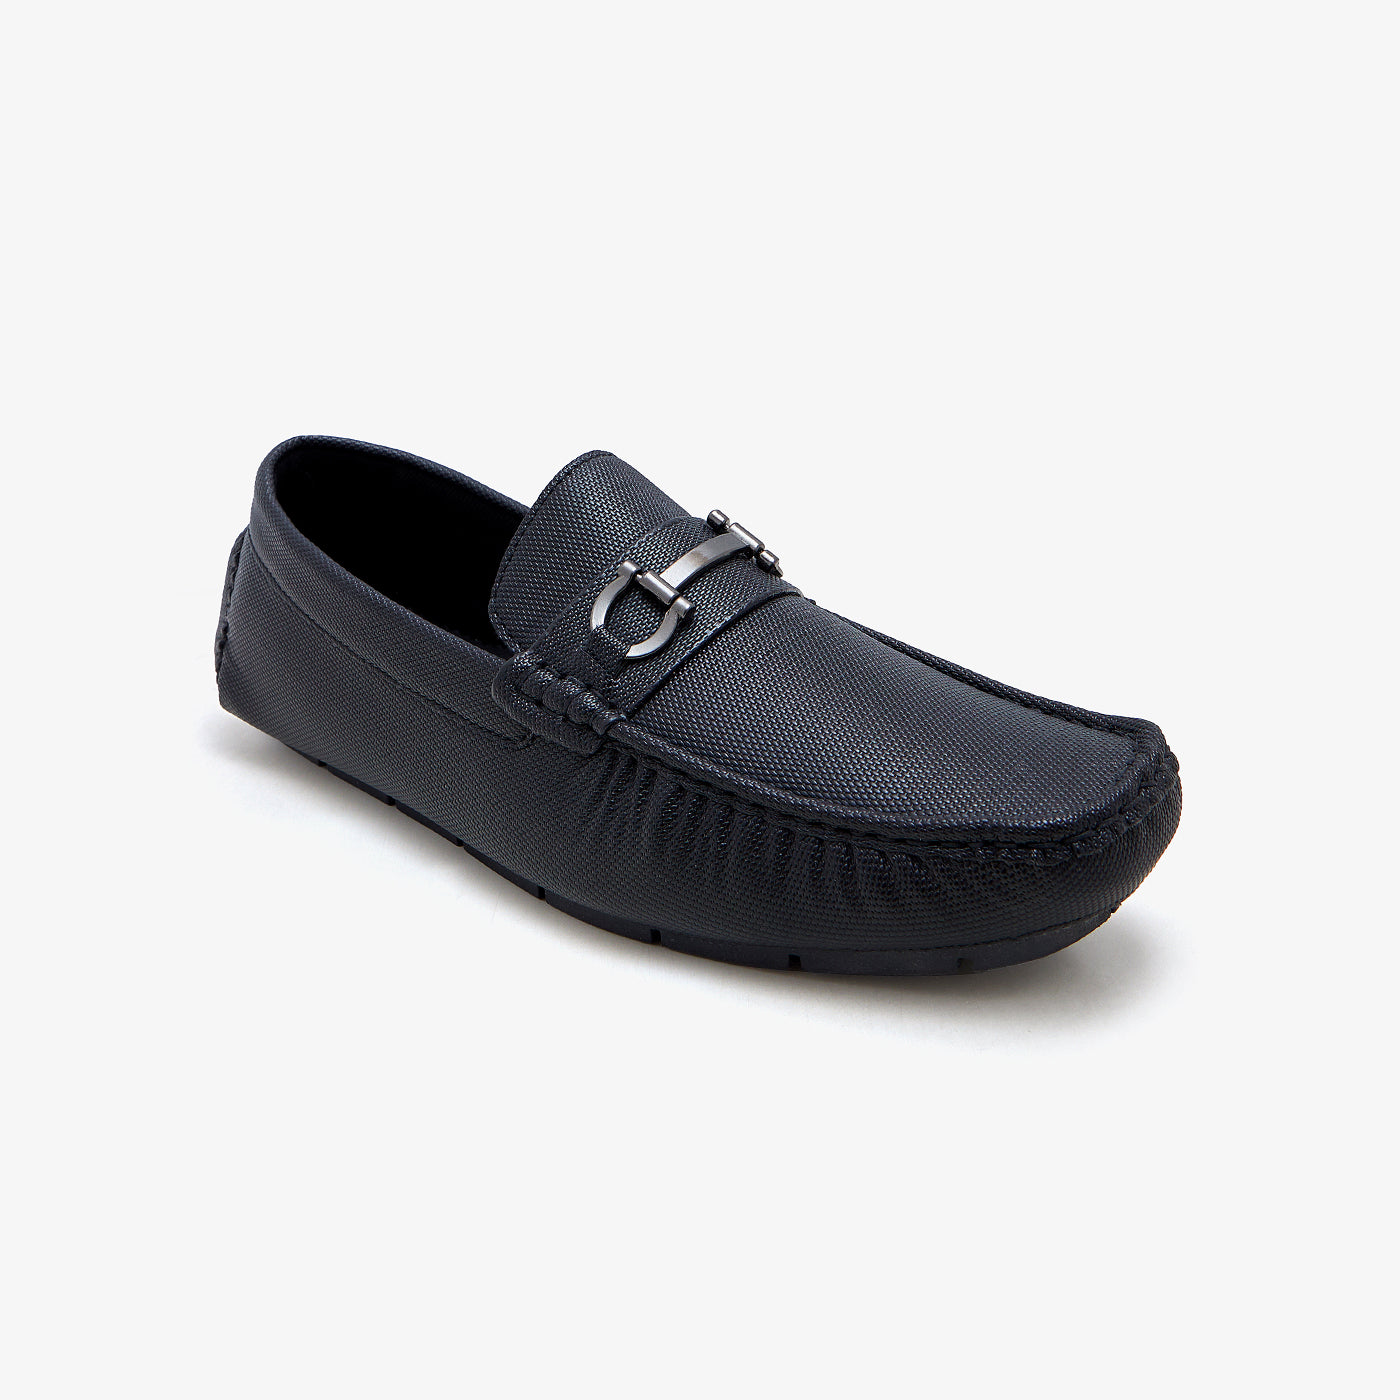 Men's Buckled Loafers